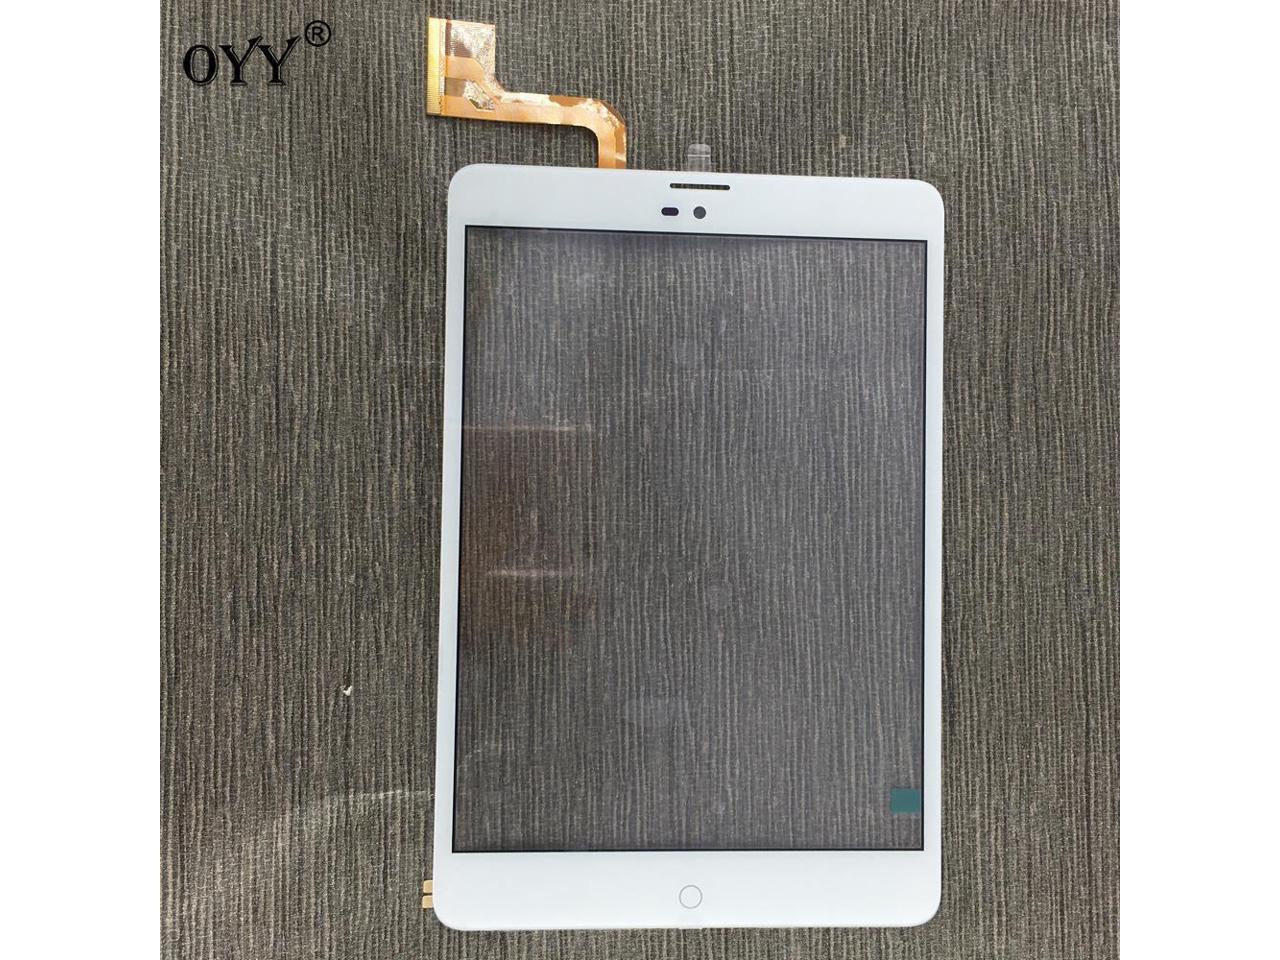 1PC 7.9" Touch Screen for FPCA-79A25-V01 BLX Digitizer Glass Panel Replacement 